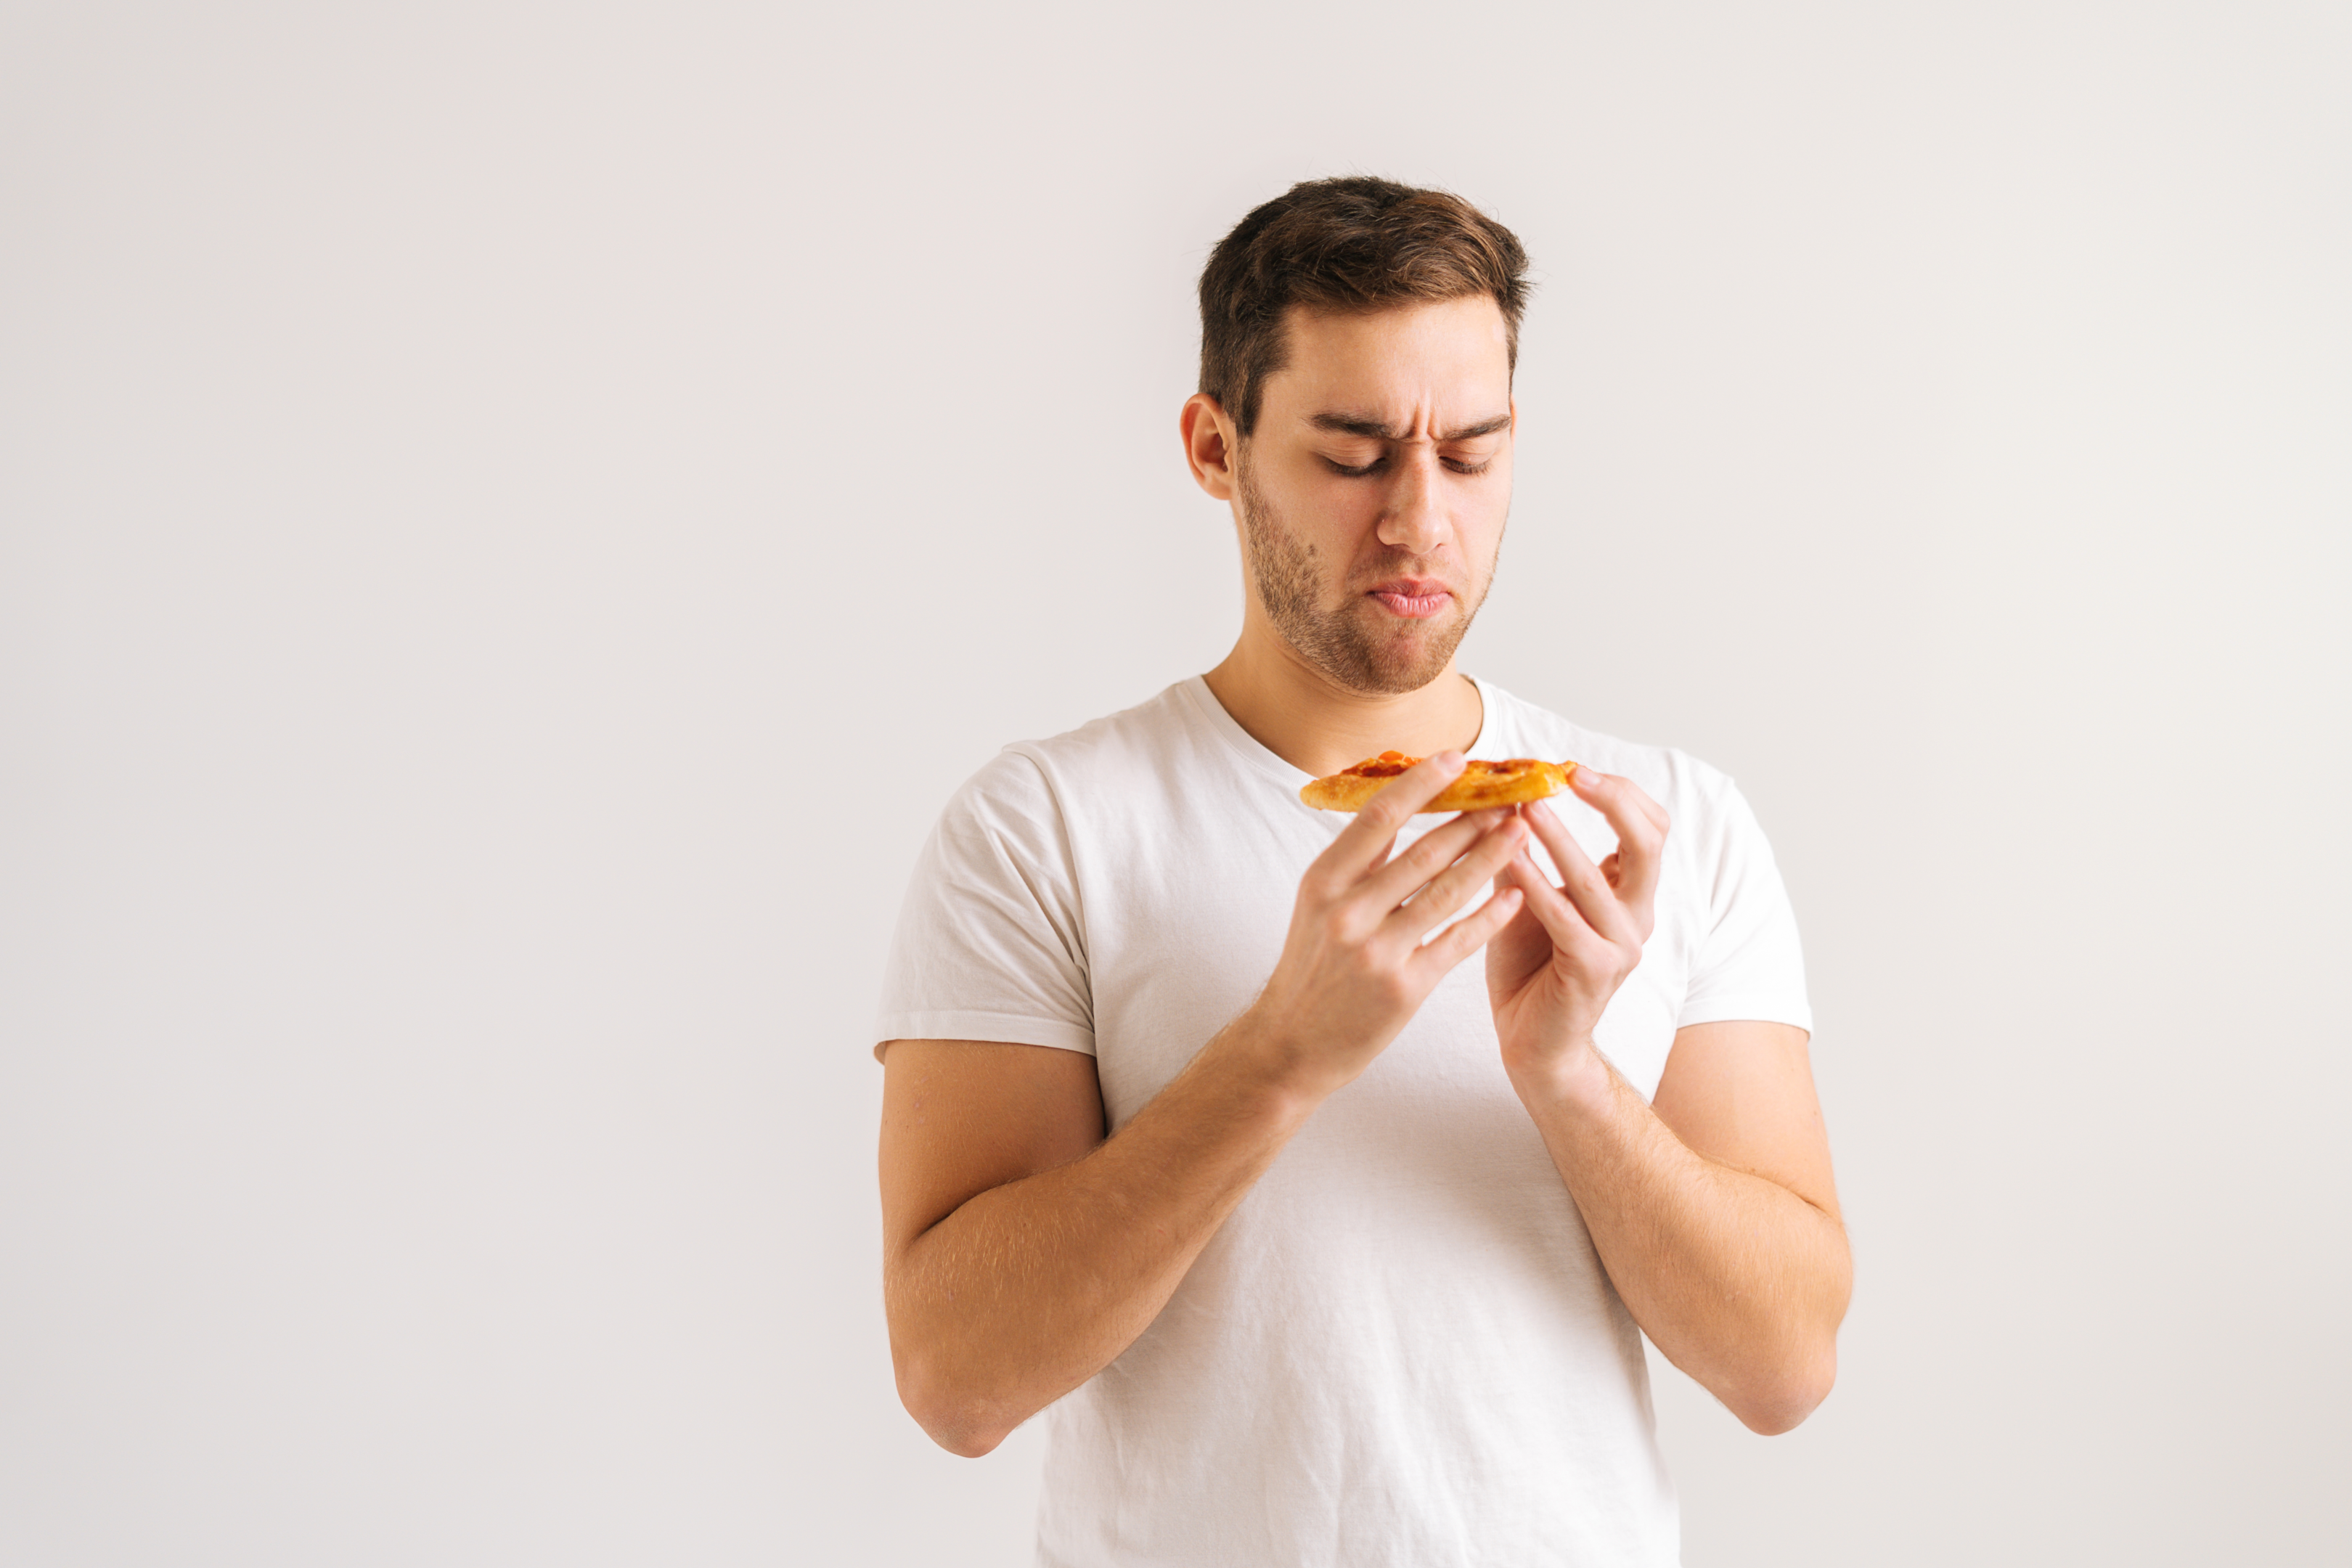 Unsatisfied hunger from man eating pizza: the difference between emotional and physical eating.